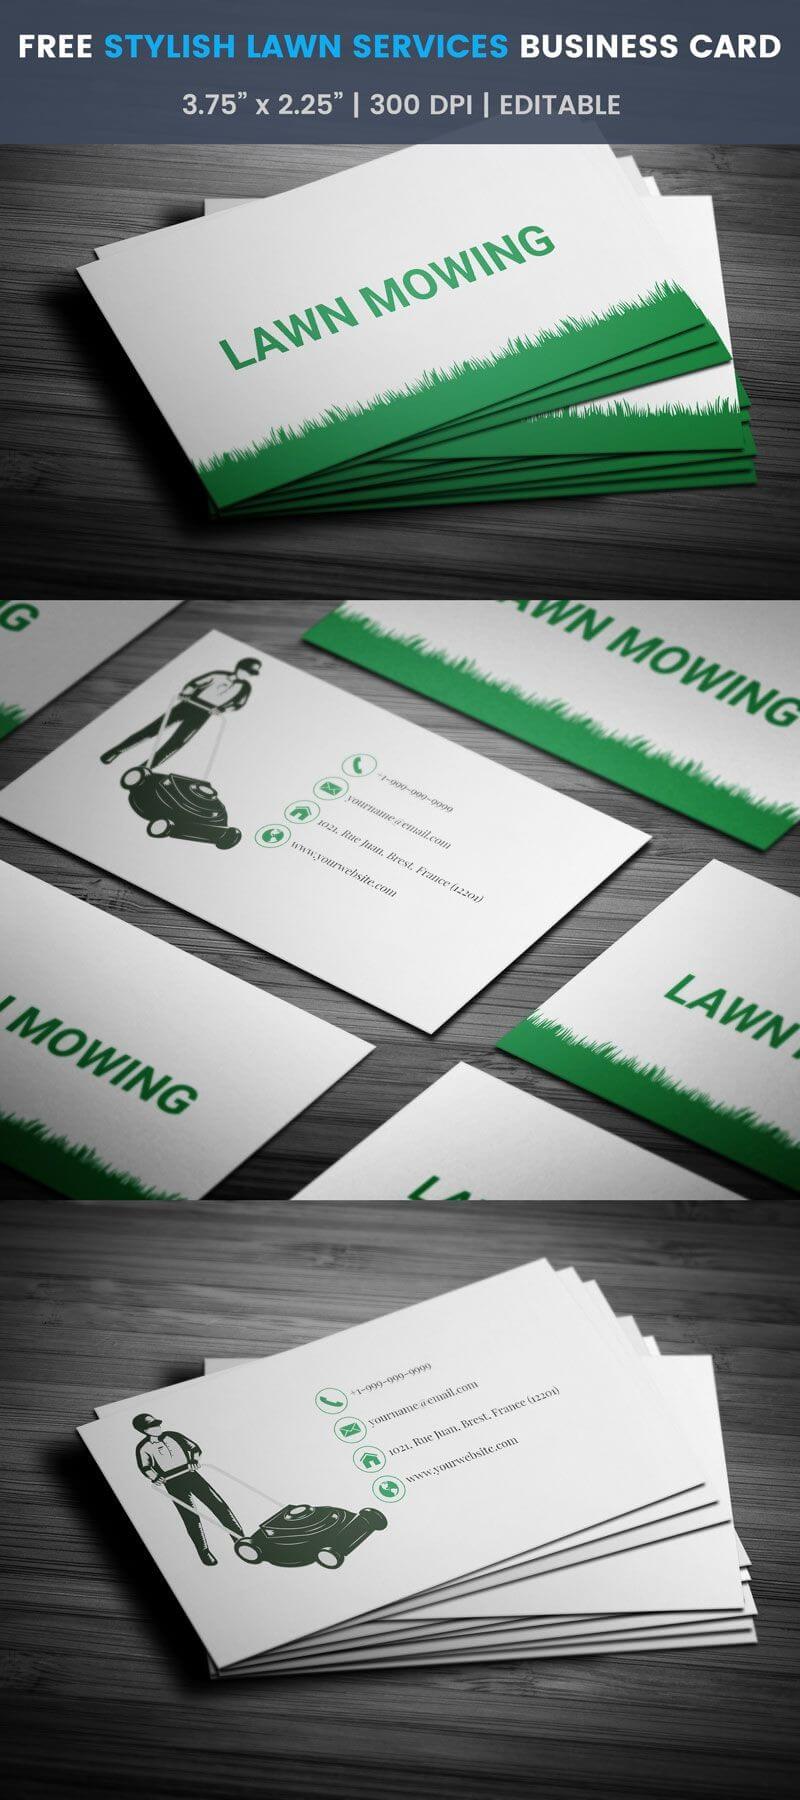 Brilliant Lawn Mowing Business Card Full Preview Free with Lawn Care